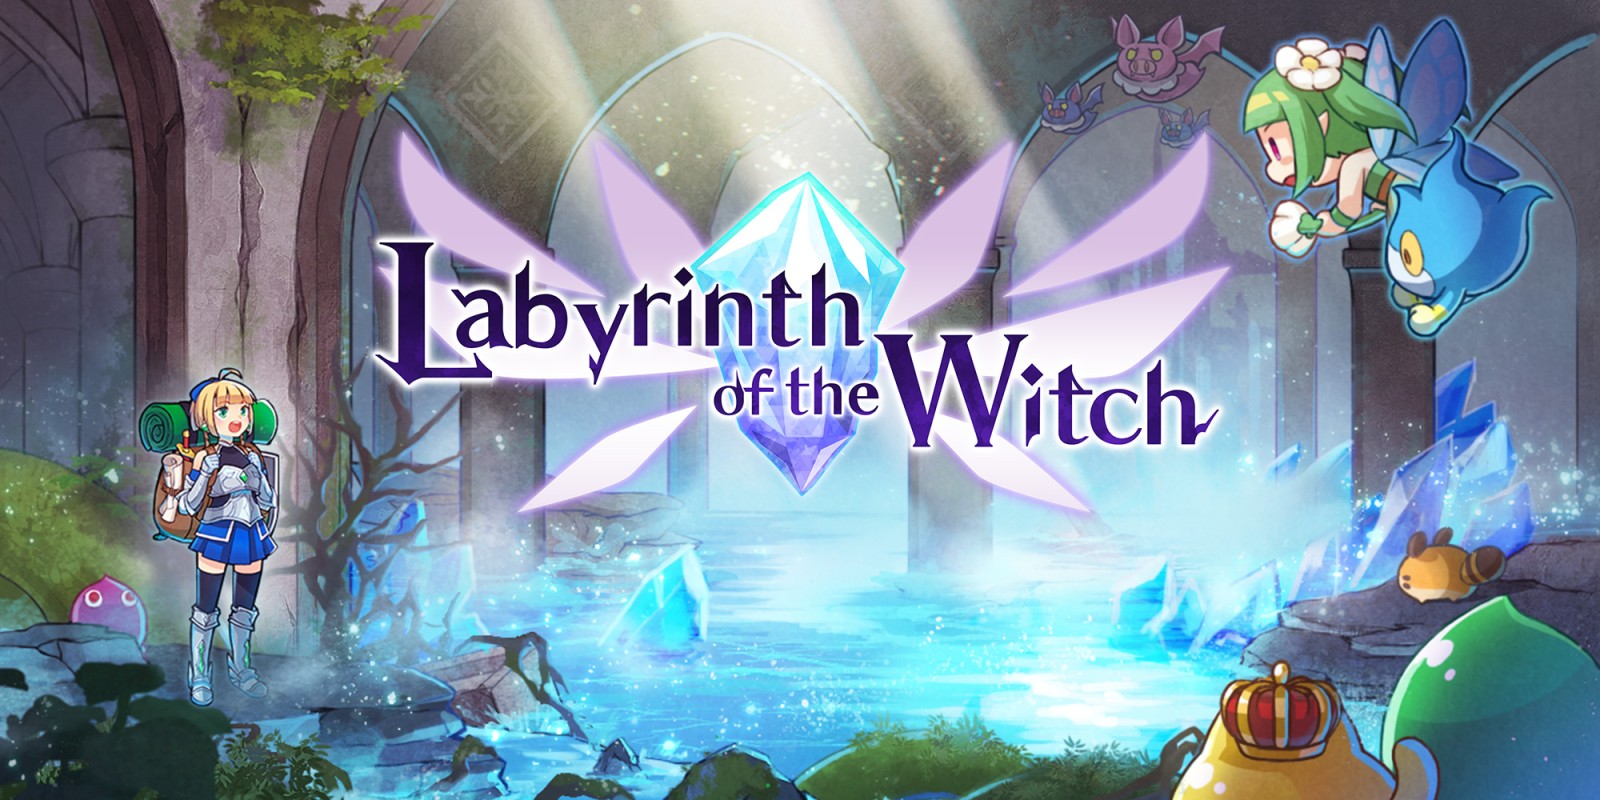 A Neverending, Always Changing Adventure Comes To Switch With a Witch This November